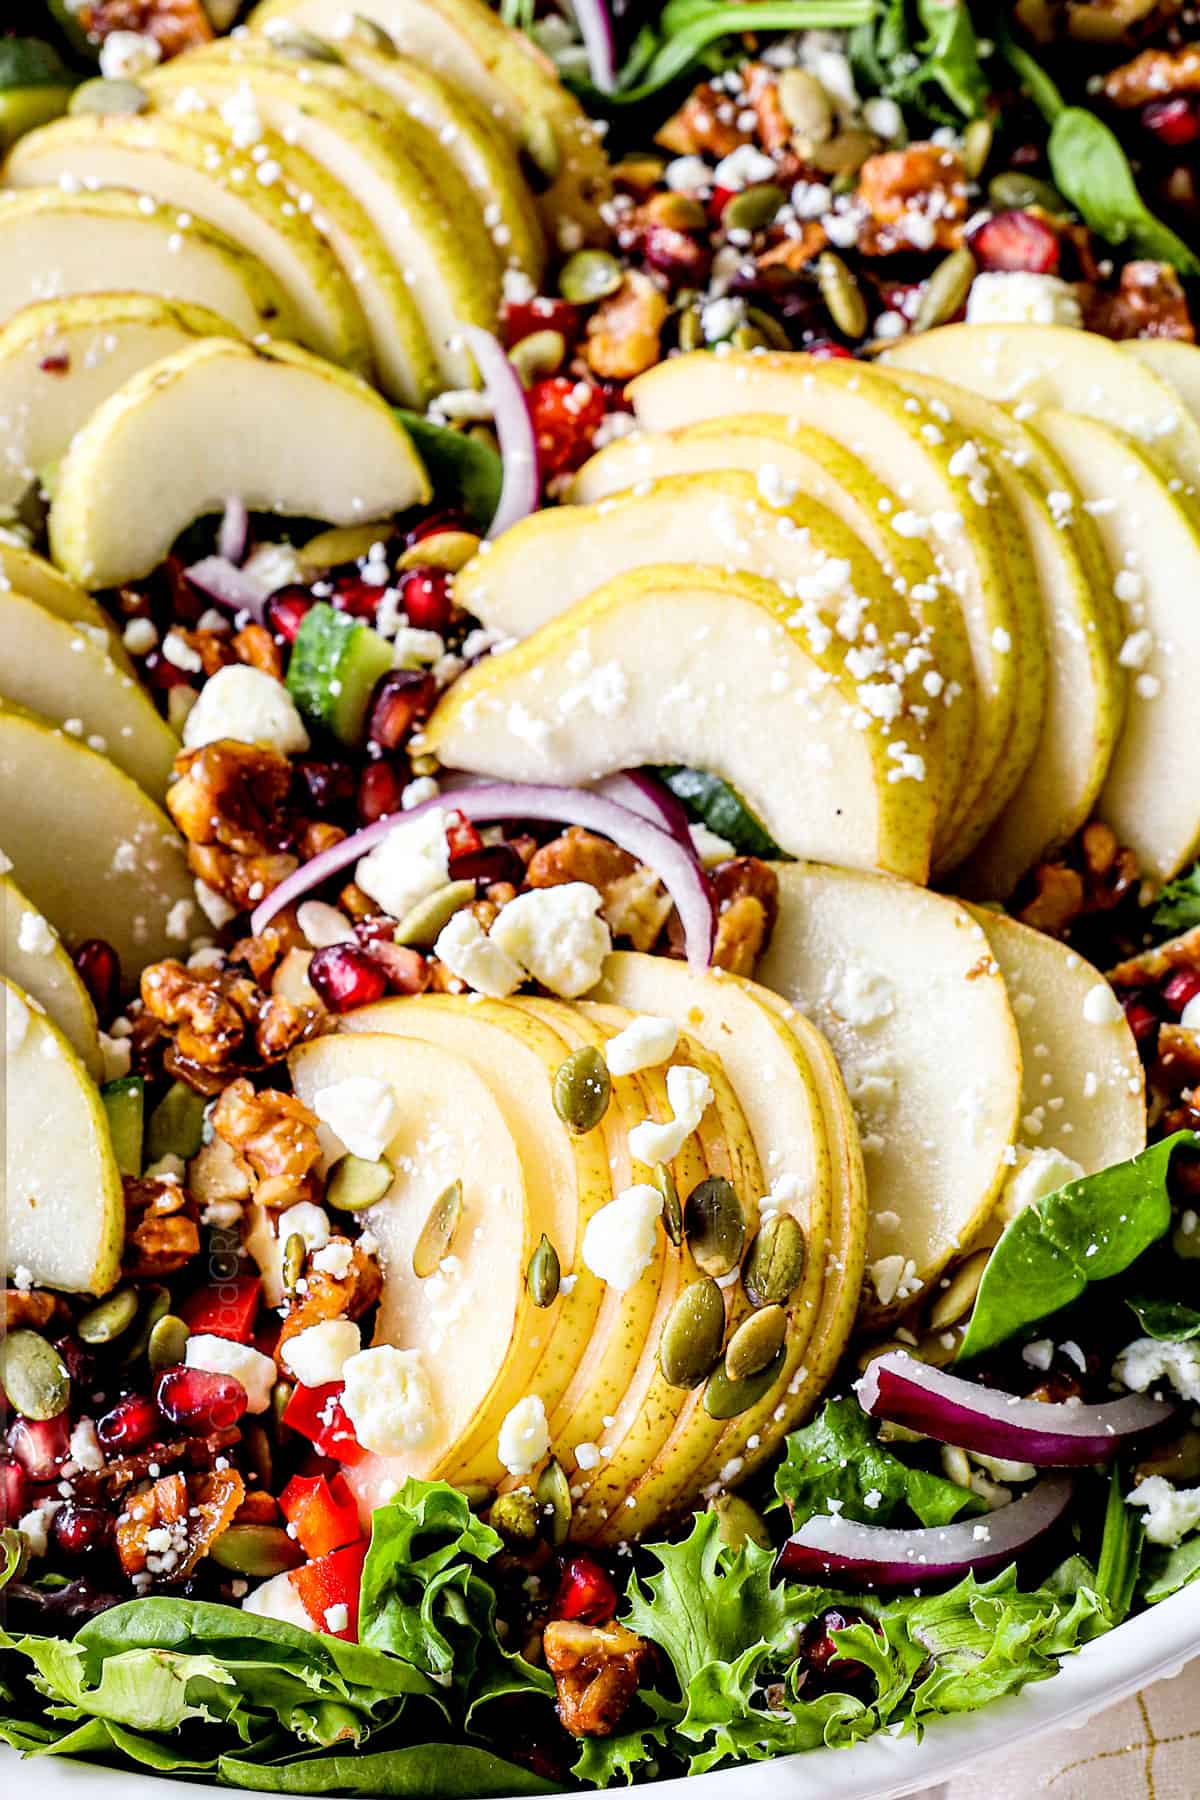 pear salad with sliced pears, gorgonzola and walnuts in a white bowl 